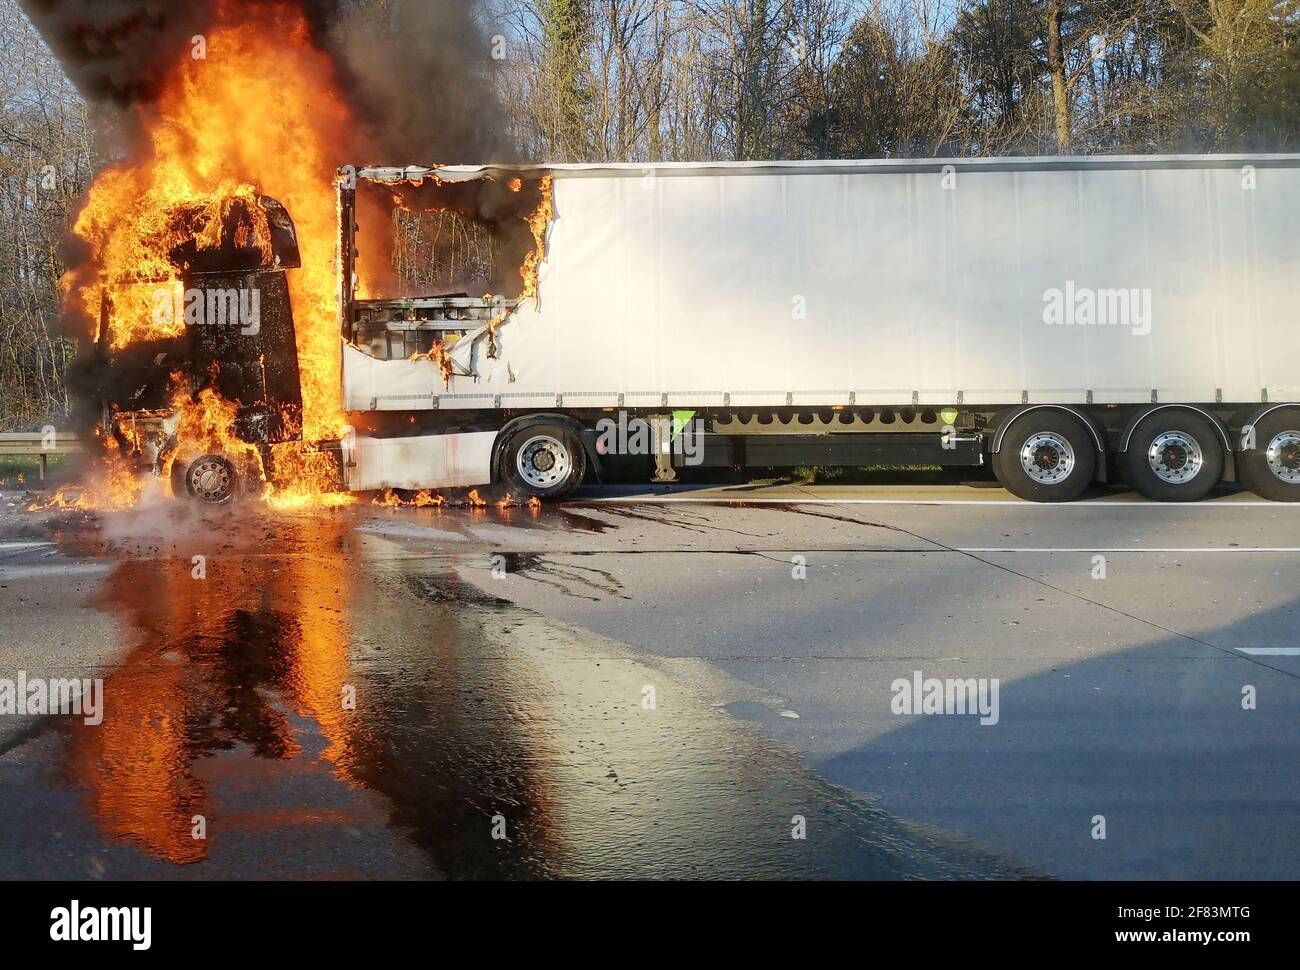 A truck is burning on the highway, with a big fire ball and smoke. Fuel lays on the track, a dangerous situation. Stock Photo